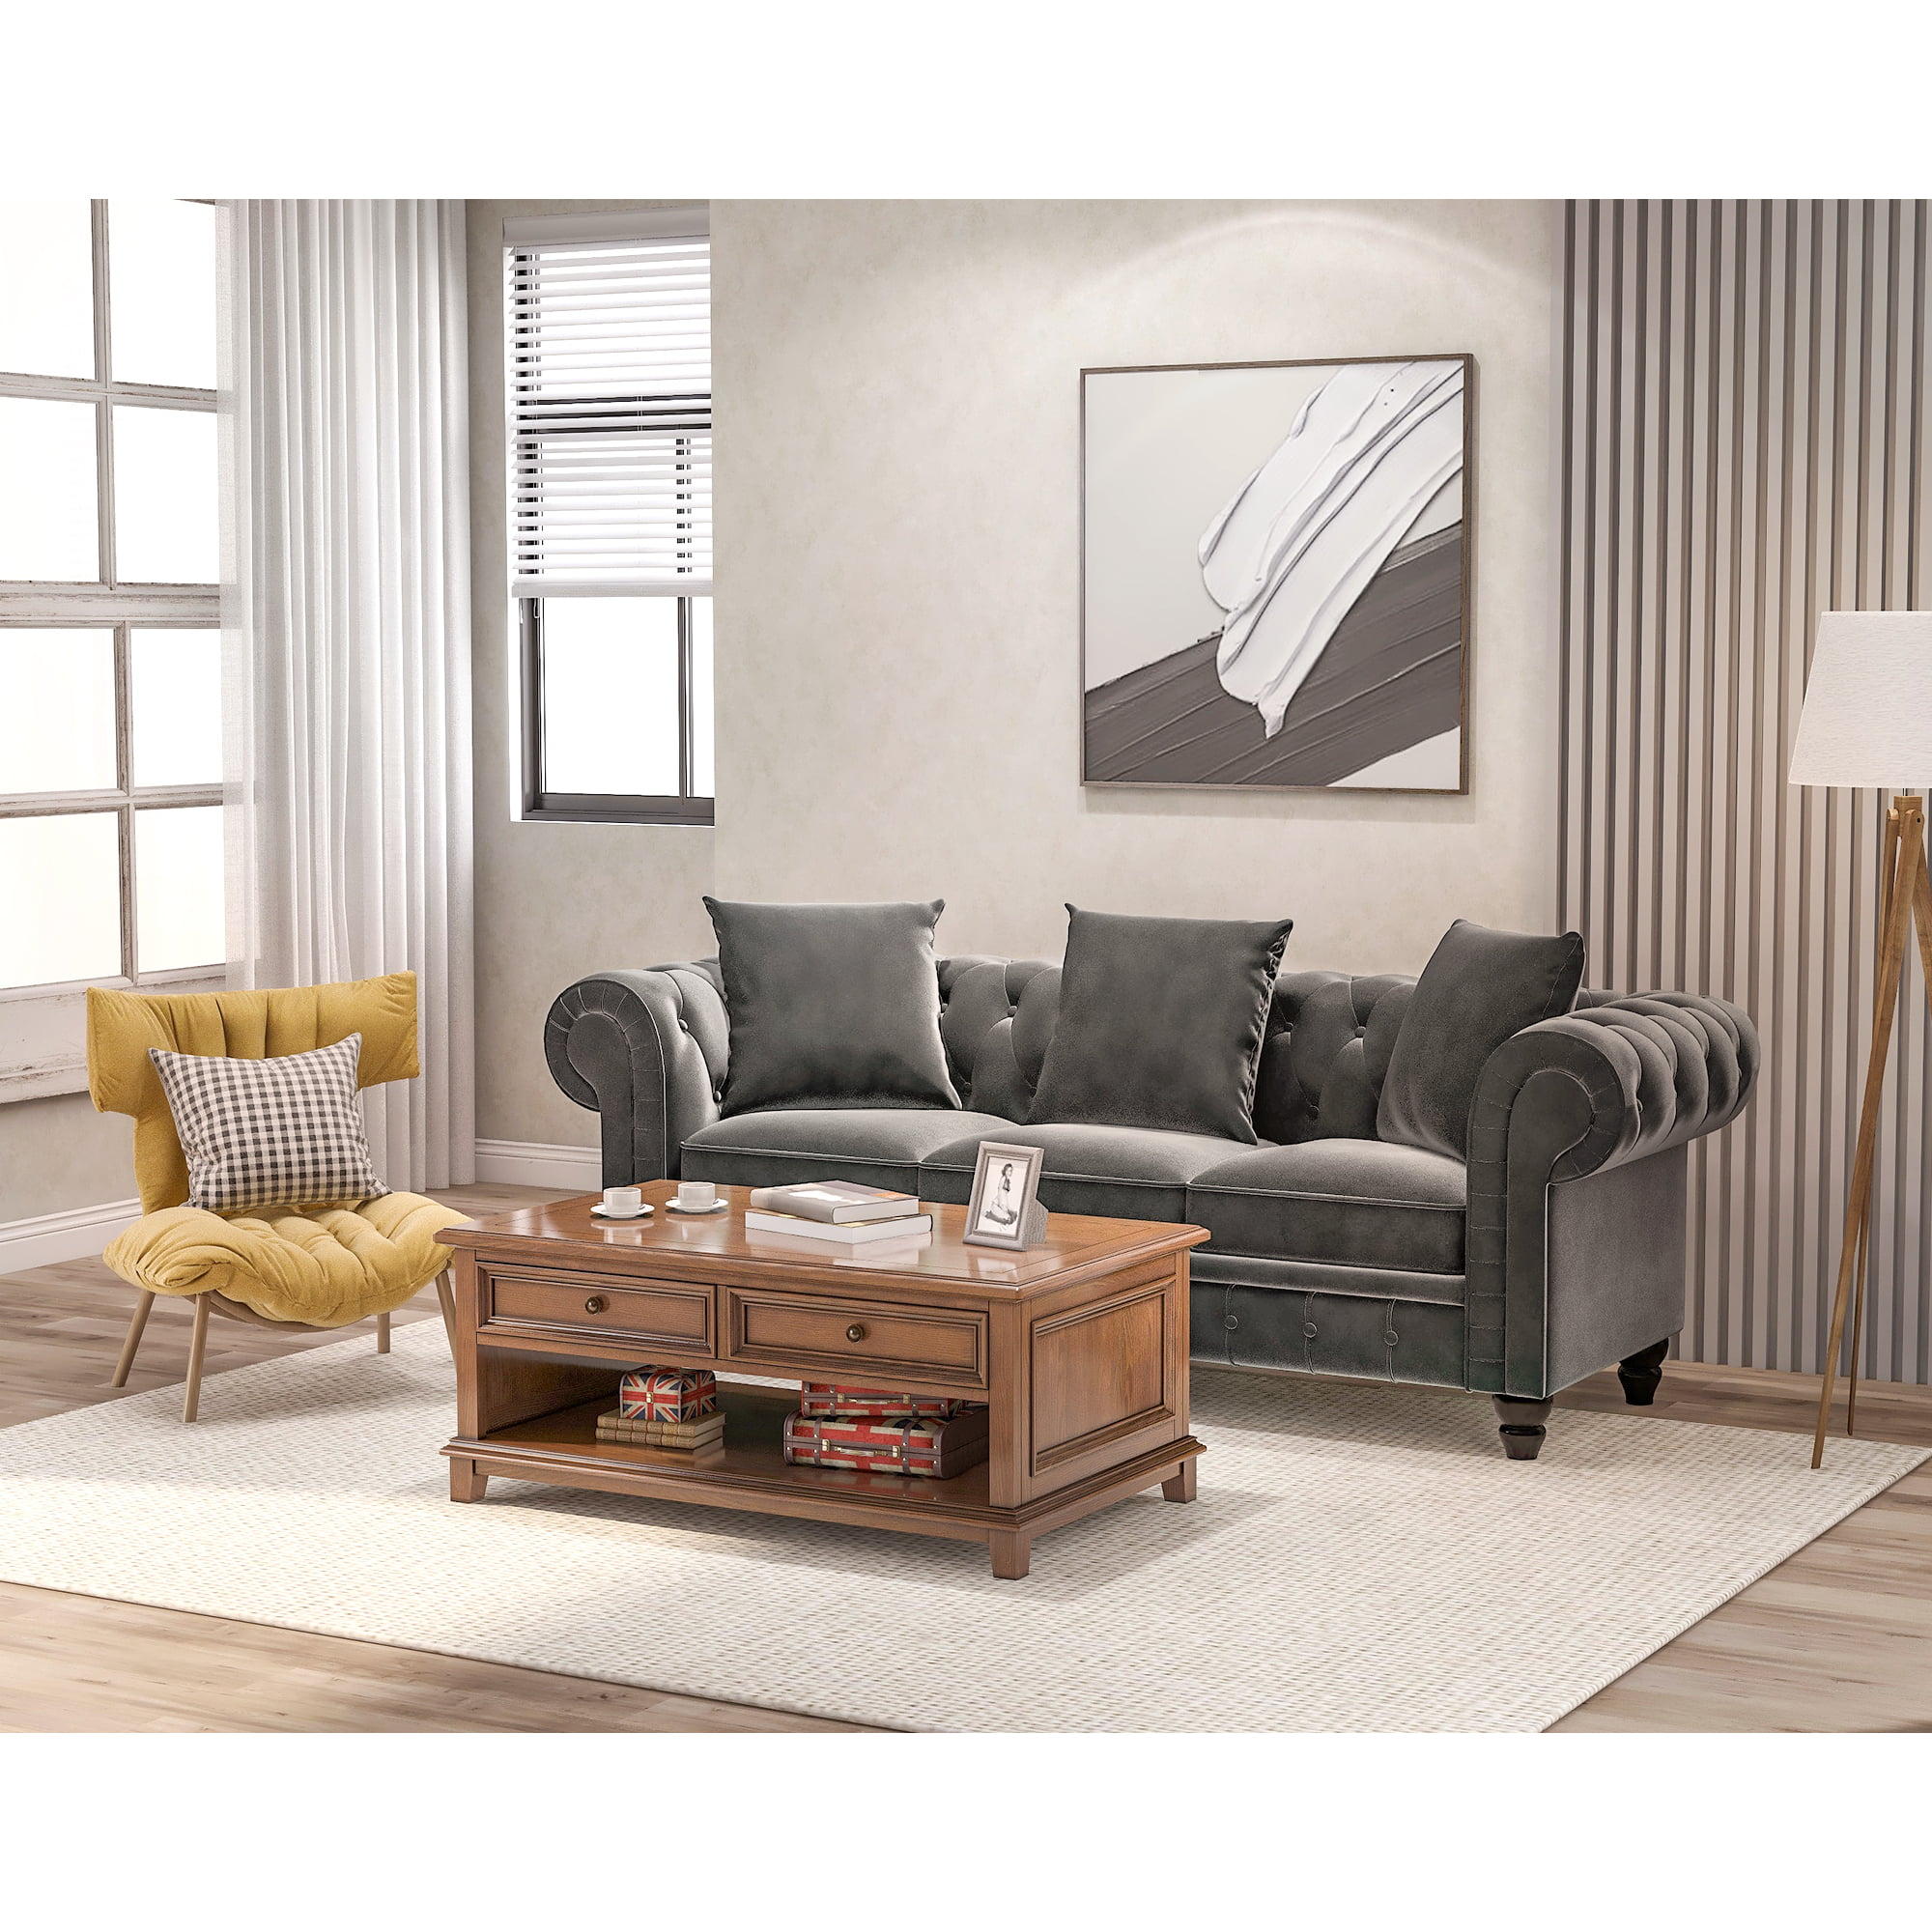 Details about   Lifestyle Solutions Taryn Rolled Arm Fabric Sofa Gray Tufted Hardwood Premium 